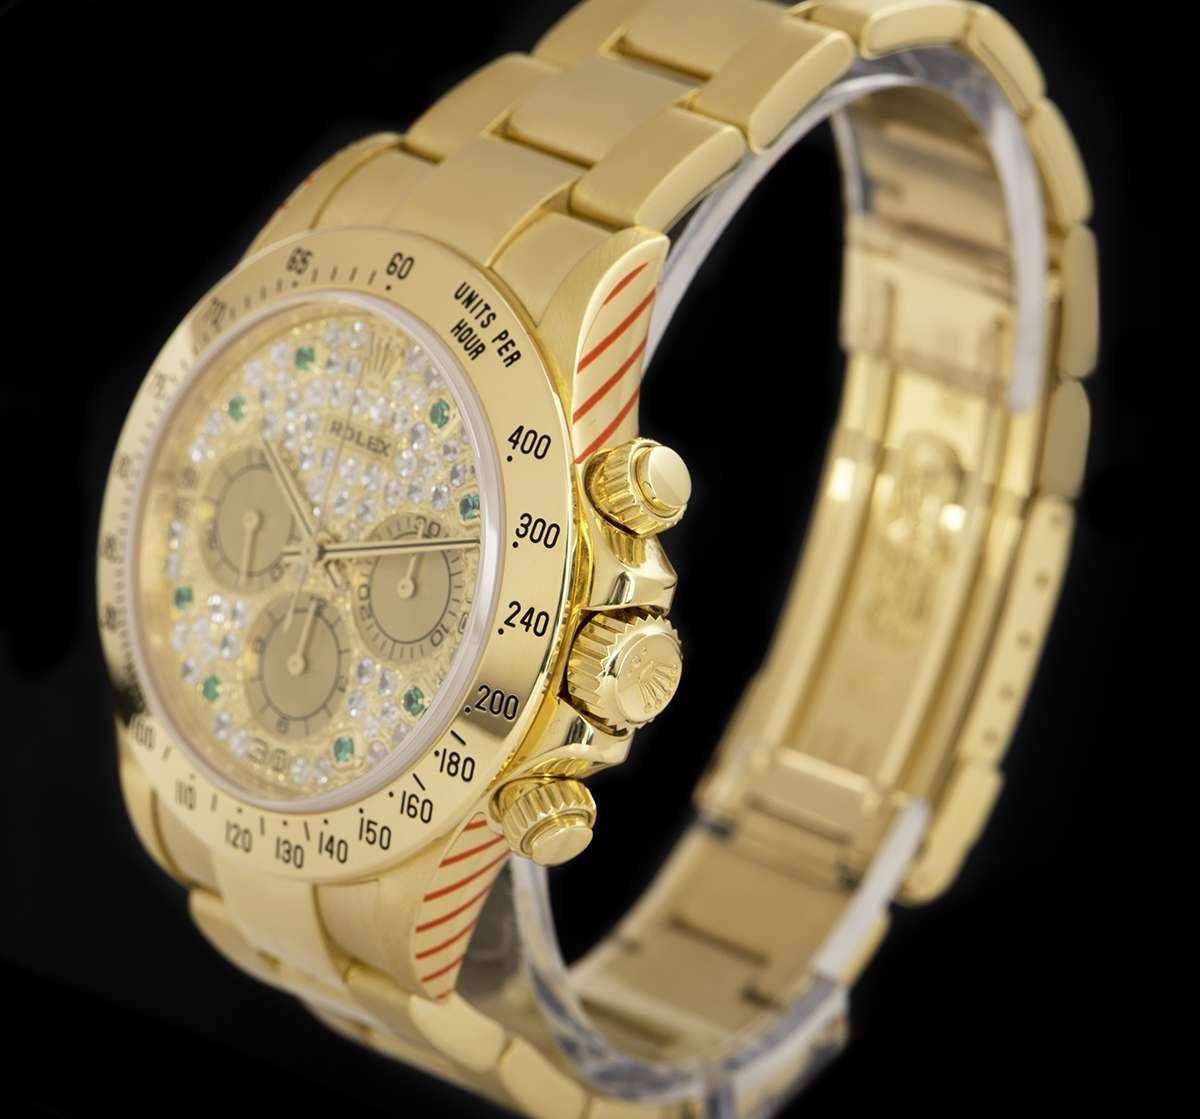 An 18k Yellow Gold Oyster Perpetual Zenith Movement Cosmograph Daytona Gents Wristwatch, pave diamond dial with 8 applied round brilliant cut emerald hour markers, 30 minute recorder at 3 0'clock, 12 hour recorder with at 6 0'clock, small seconds at